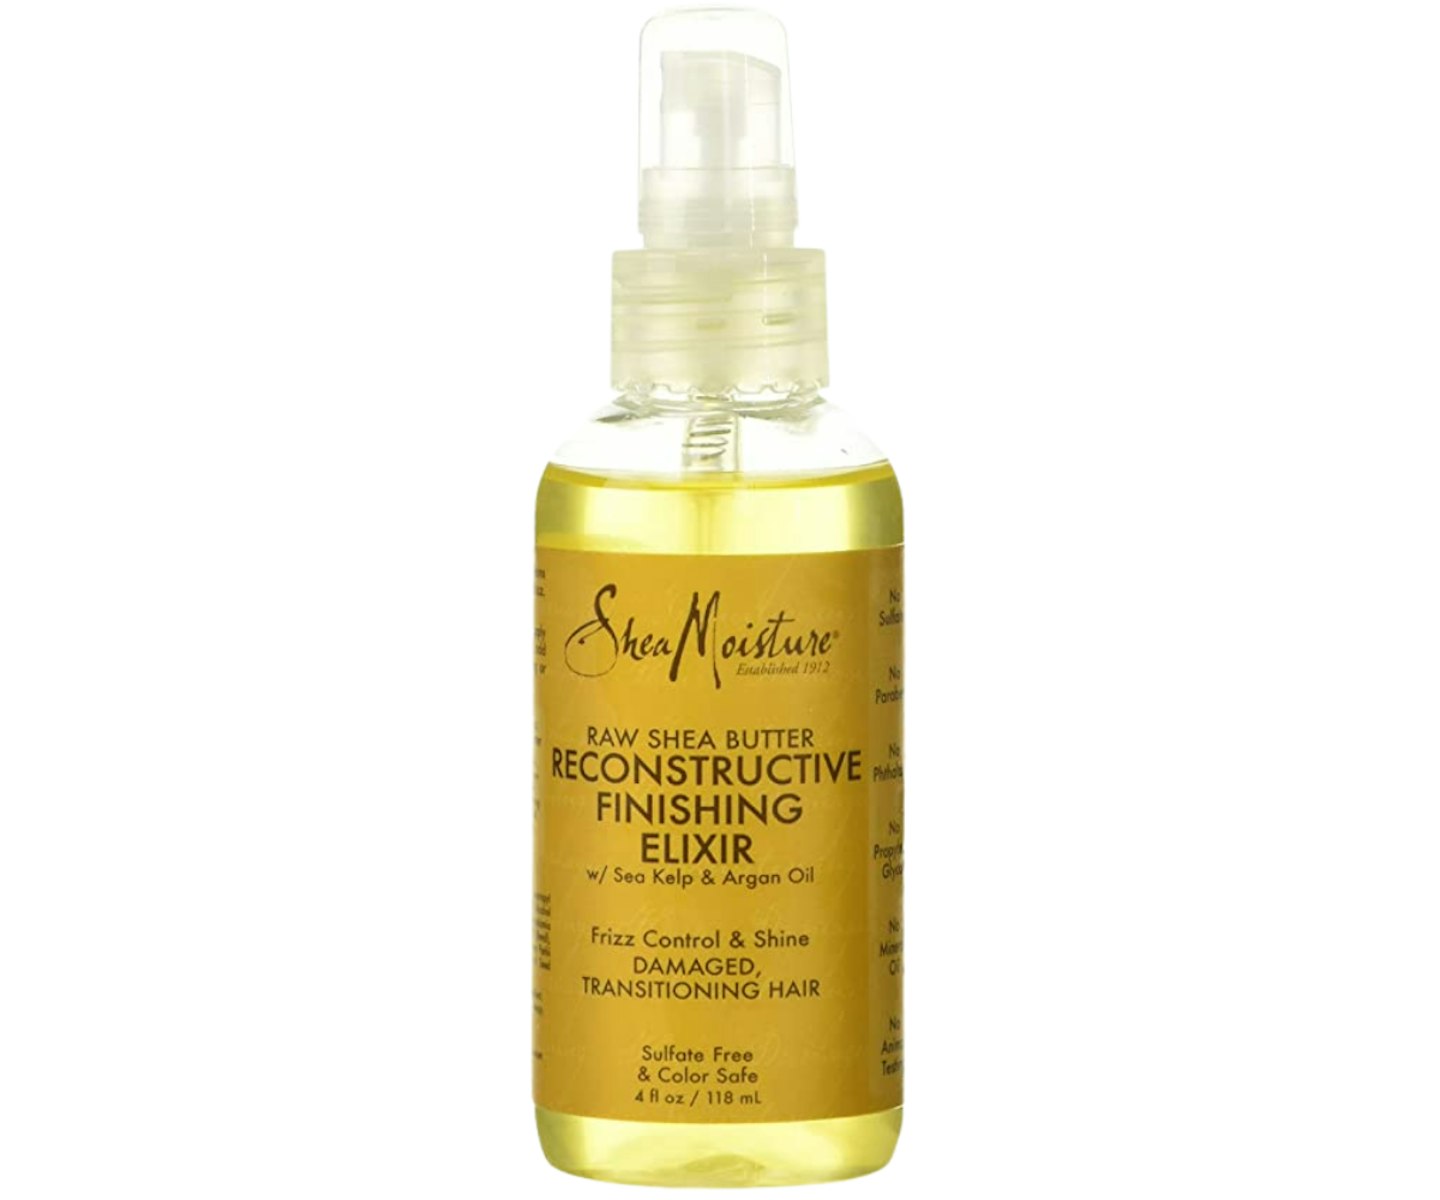 A picture of the Shea Moisture Reconstructive Finishing Elixir